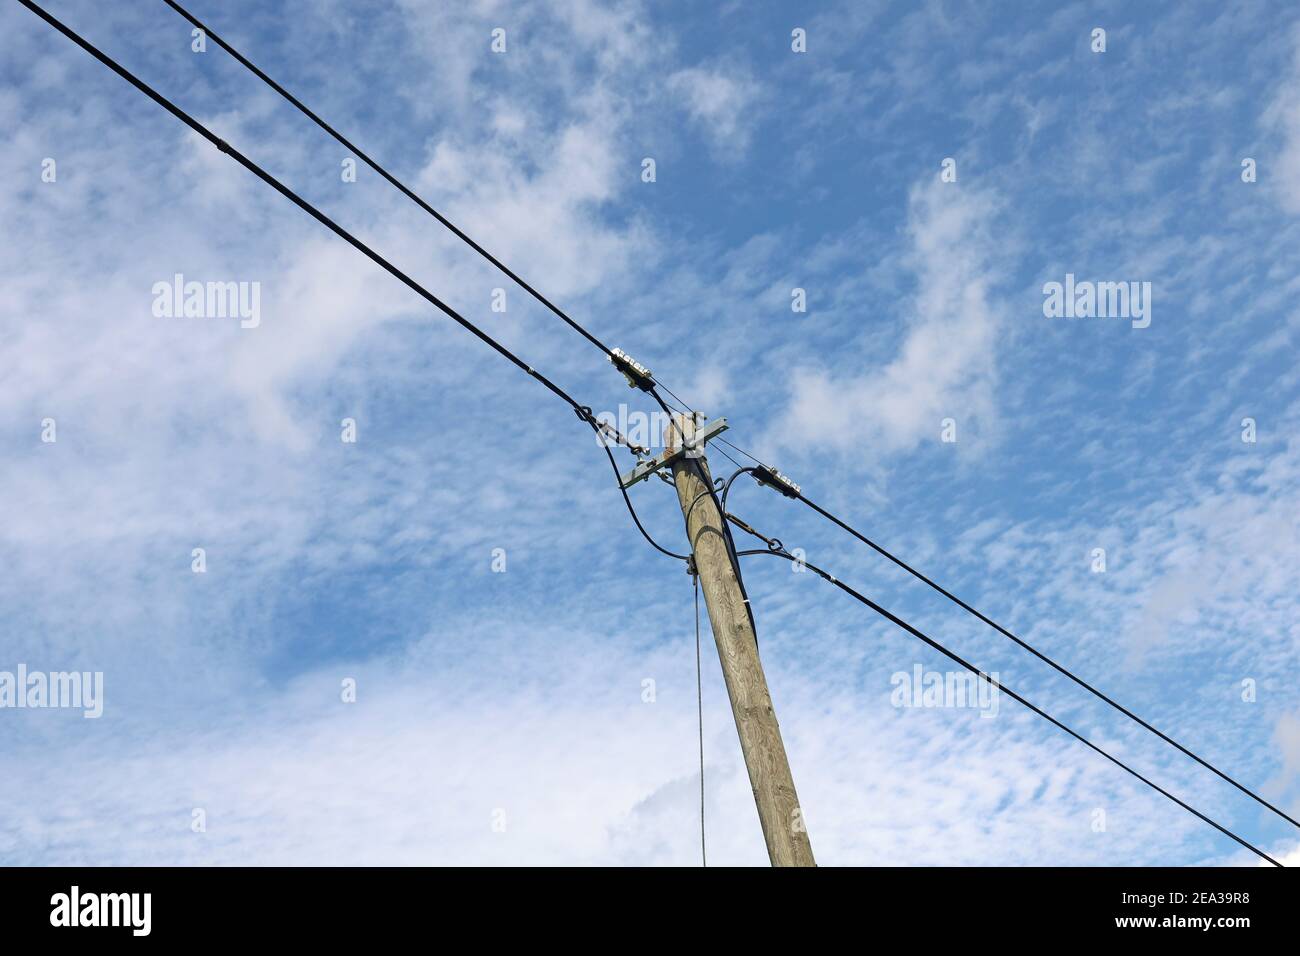 Old wooden power pole with power lines against blue cloudy sky Stock Photo